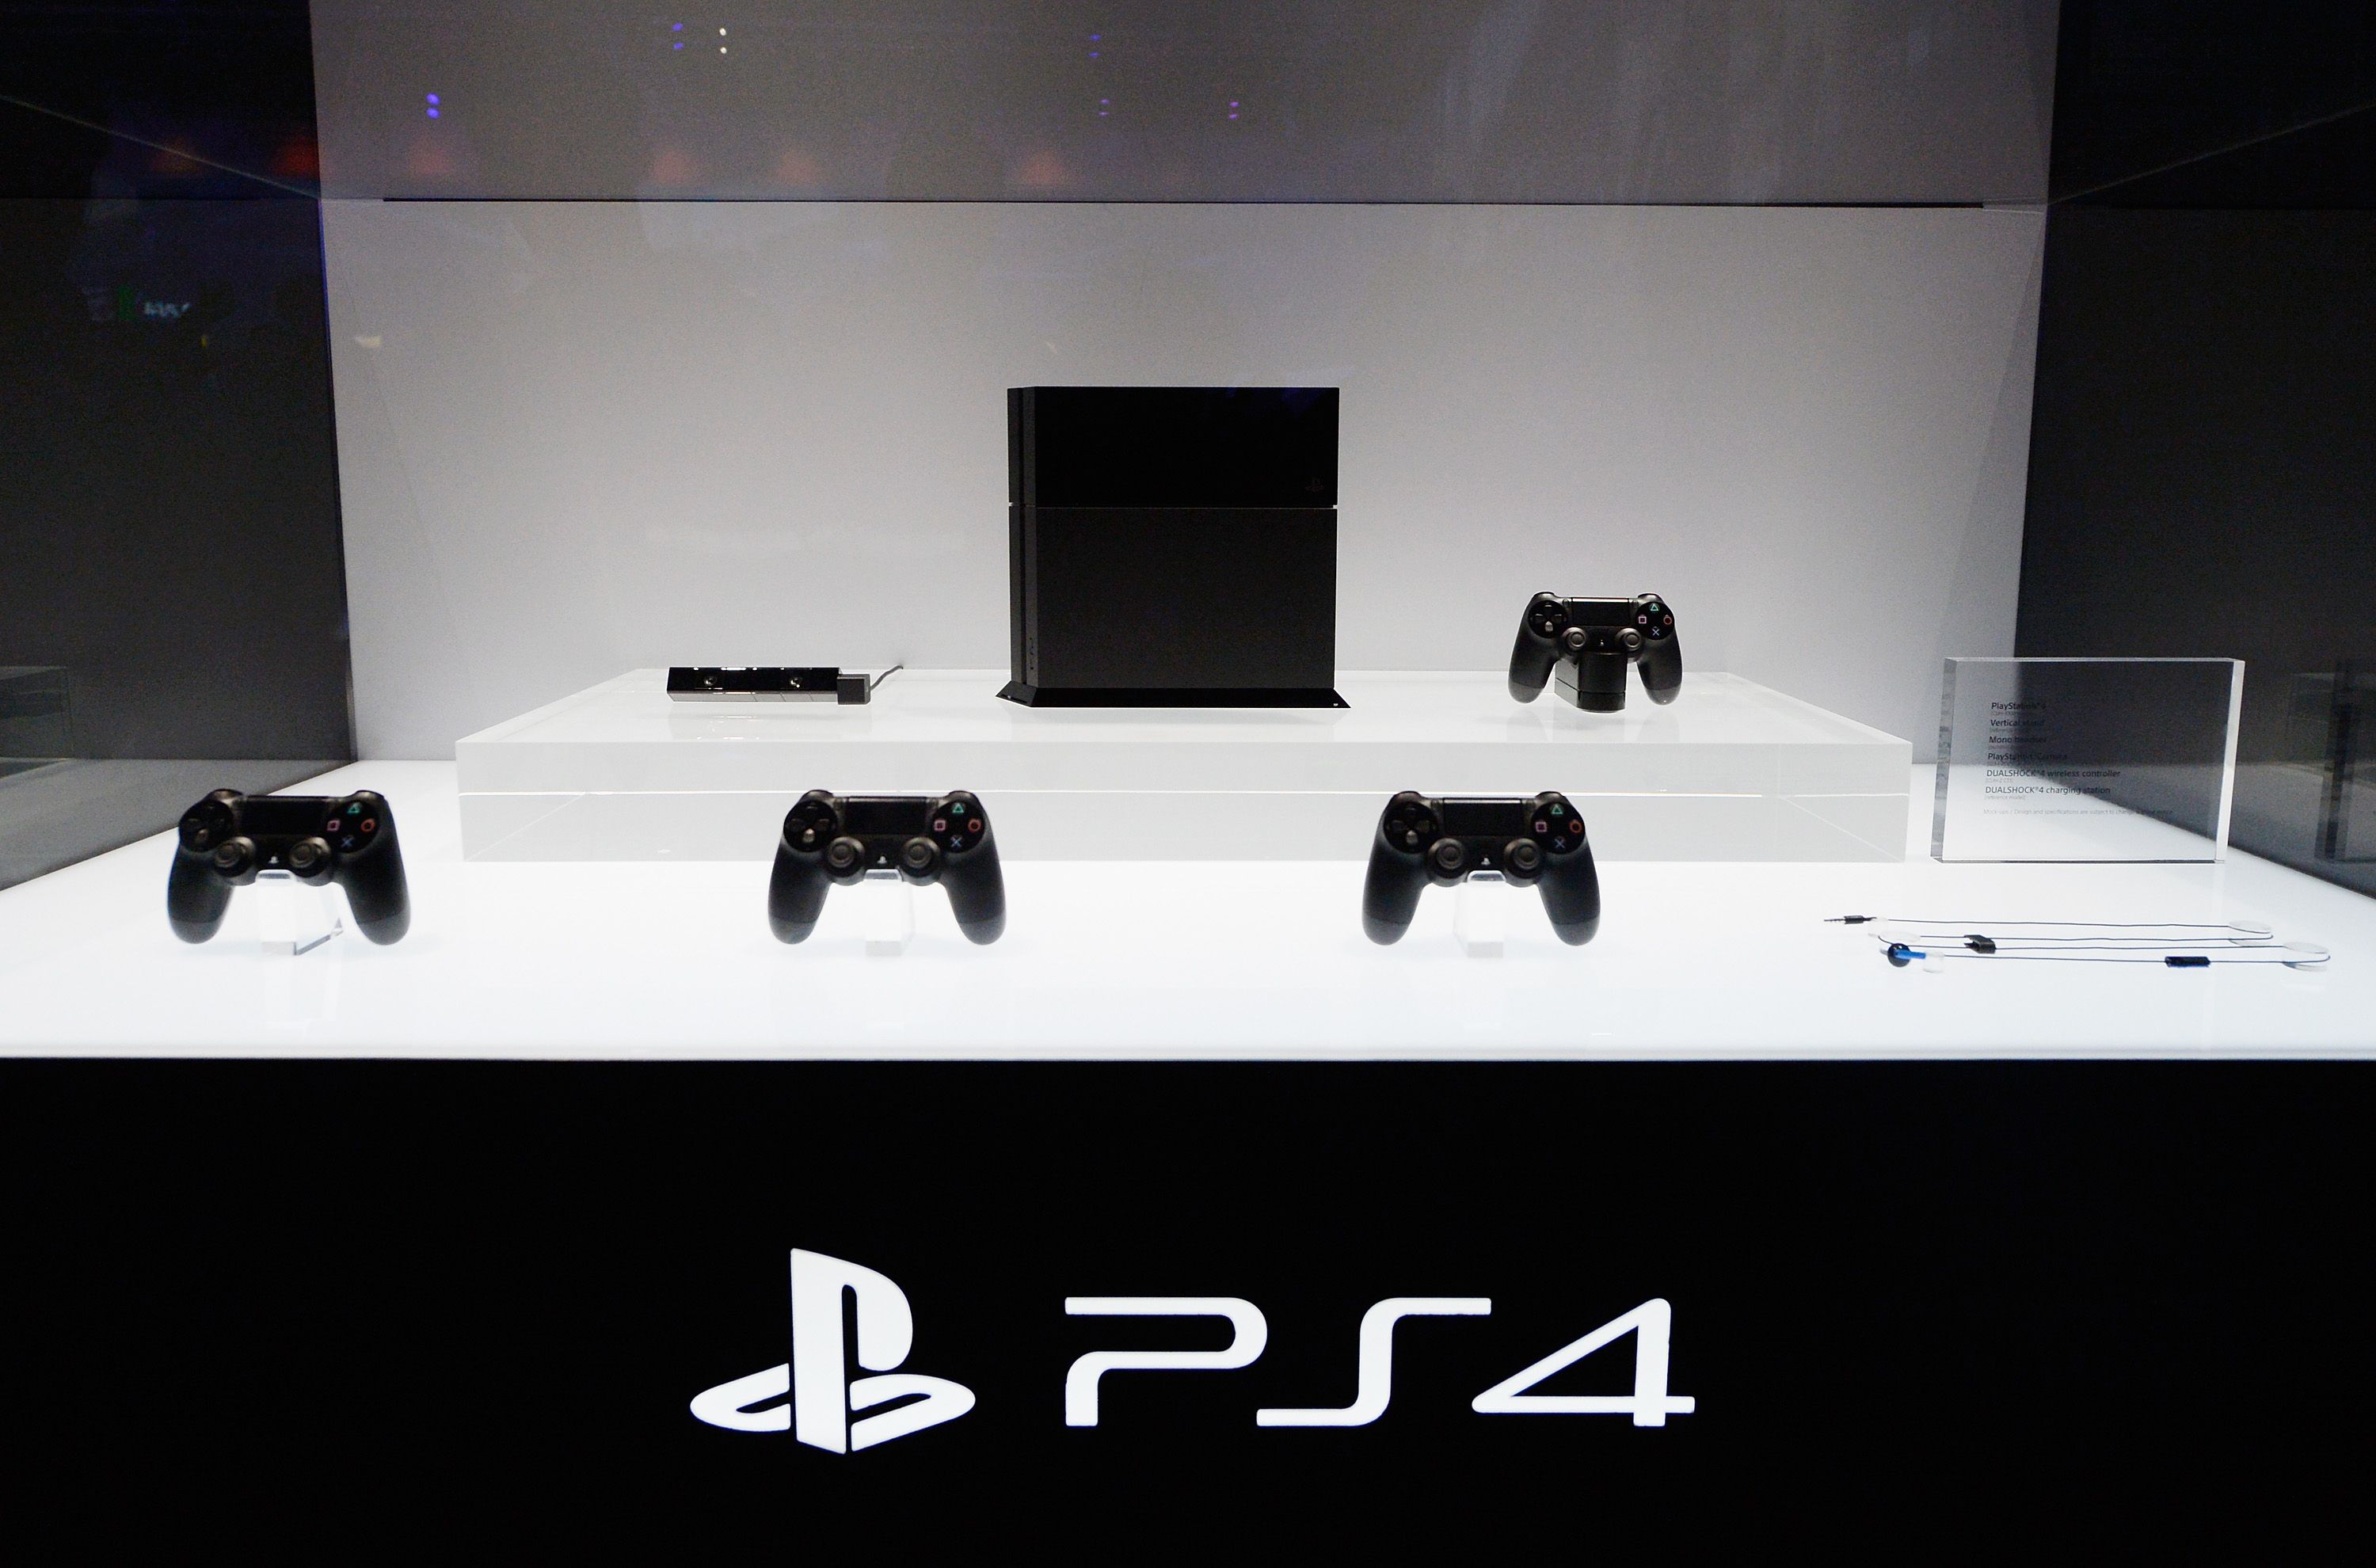 LOS ANGELES, CA - JUNE 11: A Playstation 4 and its controllers on display at the Sony Playstation E3 2013 booth at the Los Angeles Convention Center on June 11, 2013 in Los Angeles, California. Thousands are expected to attend the annual three-day convention to see the latest games and announcements from the gaming industry. 